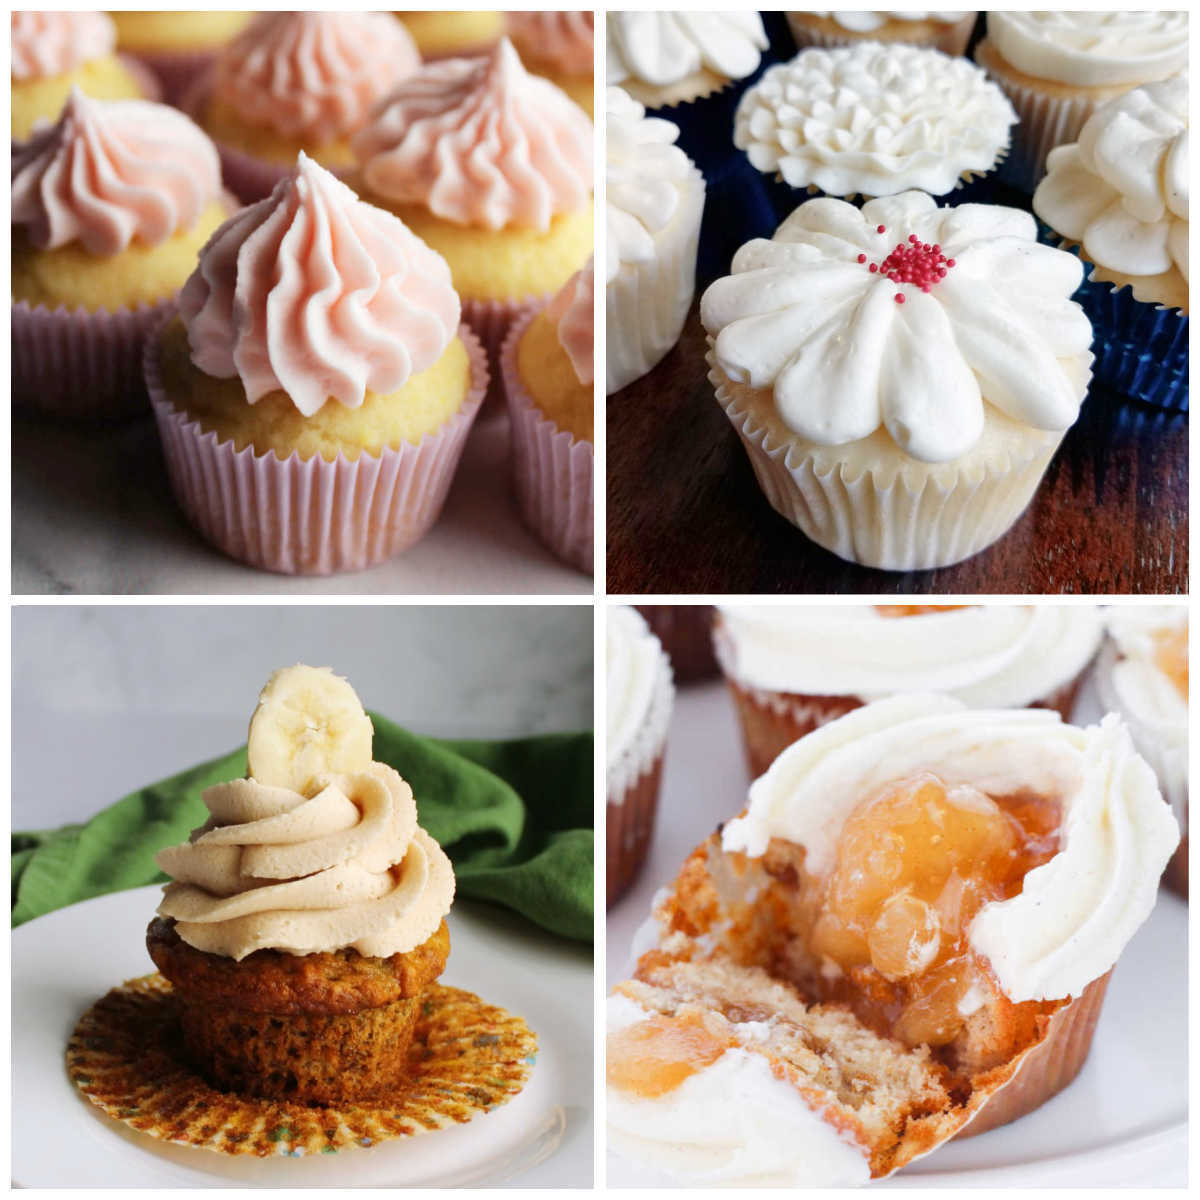 Collage of cupcake images including mini cupcakes, white cupcakes, banana cupcakes and apple pie cupcakes.